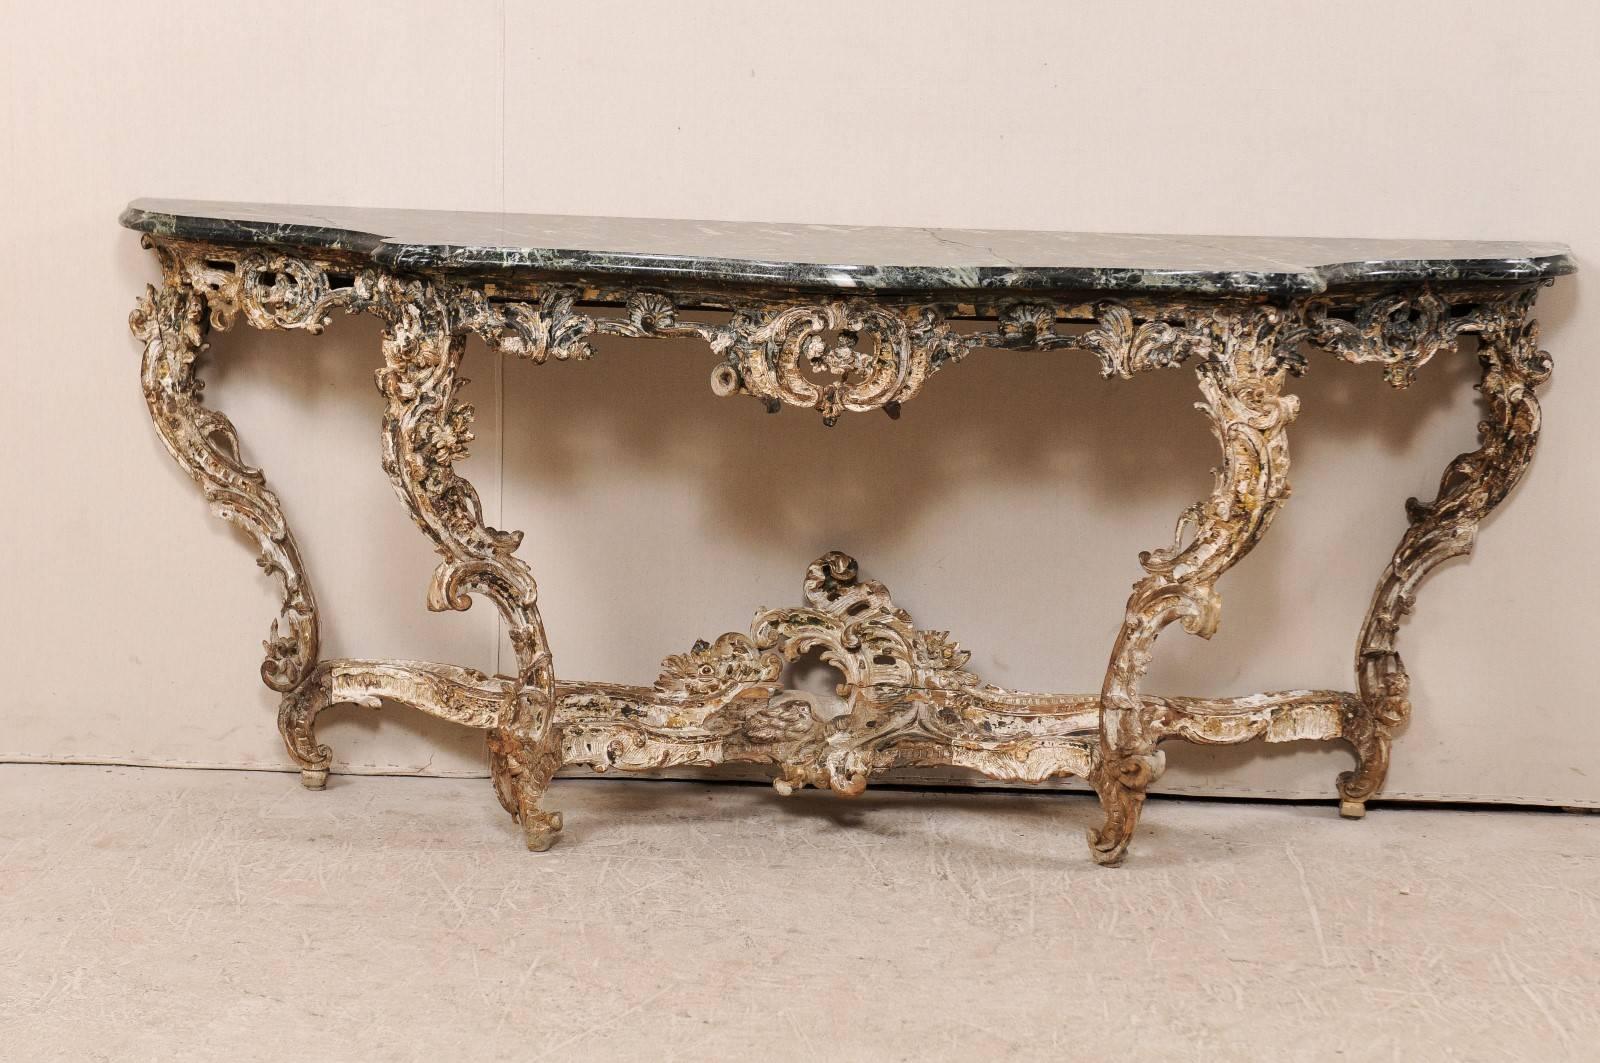 A French 18th century carved wood Rococo console table with marble top. This gorgeous French console table features the typical French elaborate carvings of the Rococo period along the skirt, cross stretcher and four legs. The base is gesso and over